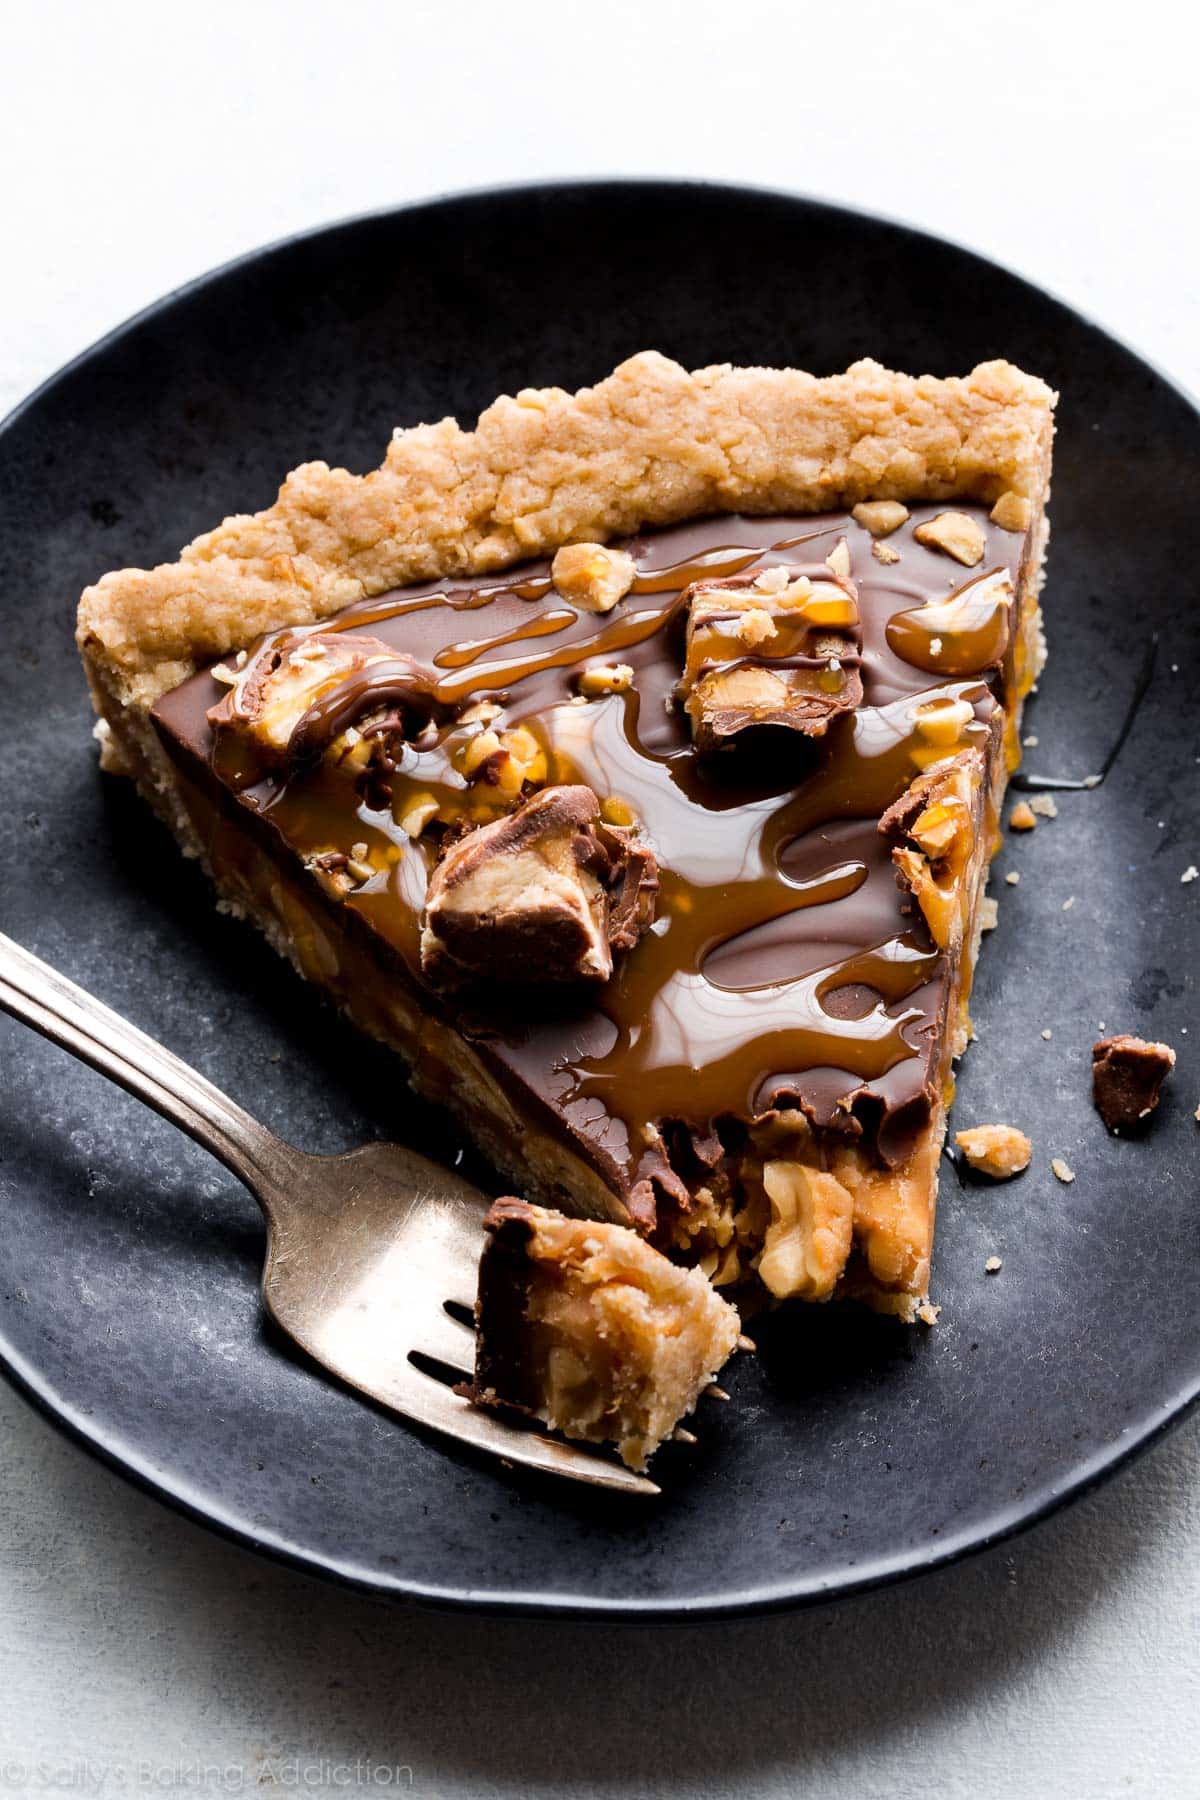 Snickers caramel tart with salted caramel, peanut crust, salty peanuts, and chocolate peanut butter topping! Recipe on sallysbakingaddiction.com